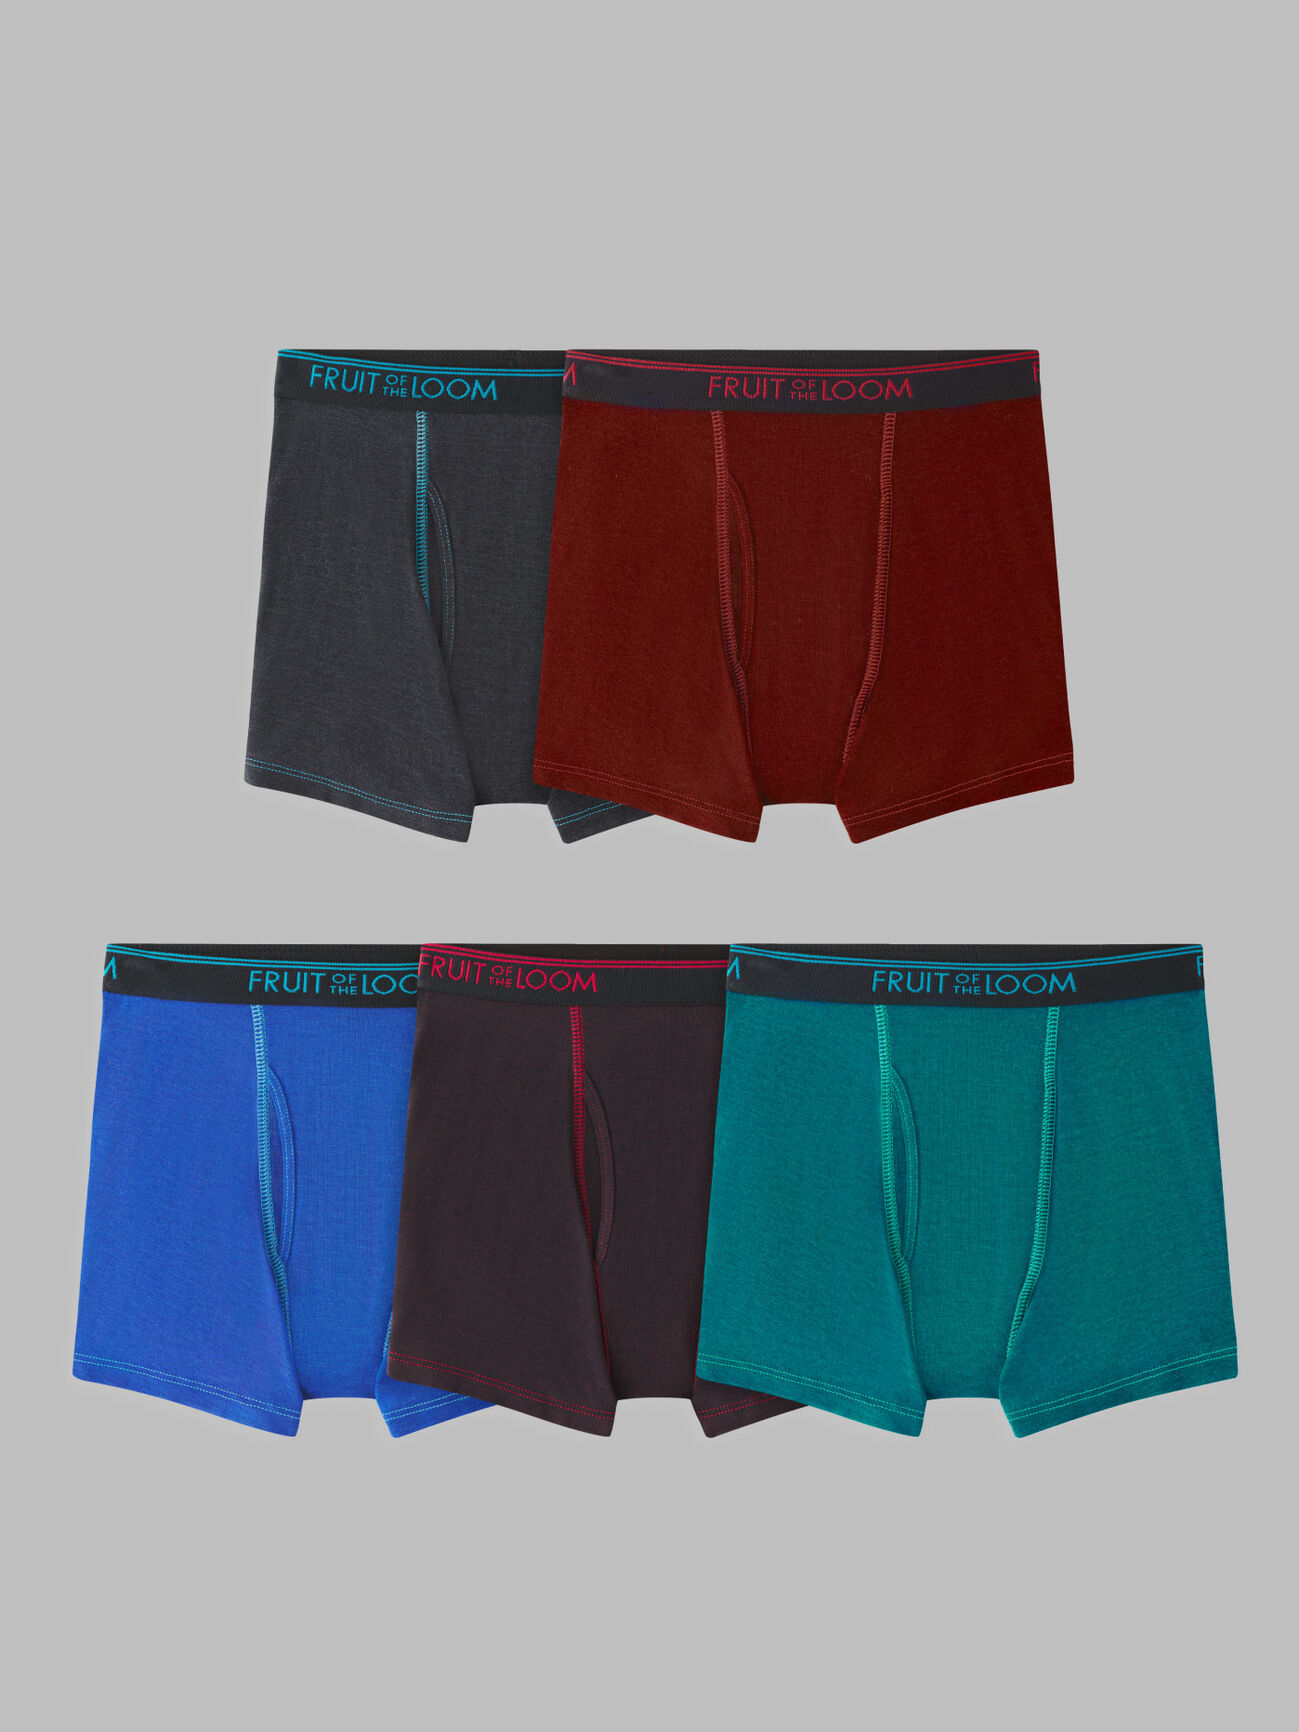 Innovative underwear may solve a daily problem dudes love to complain about